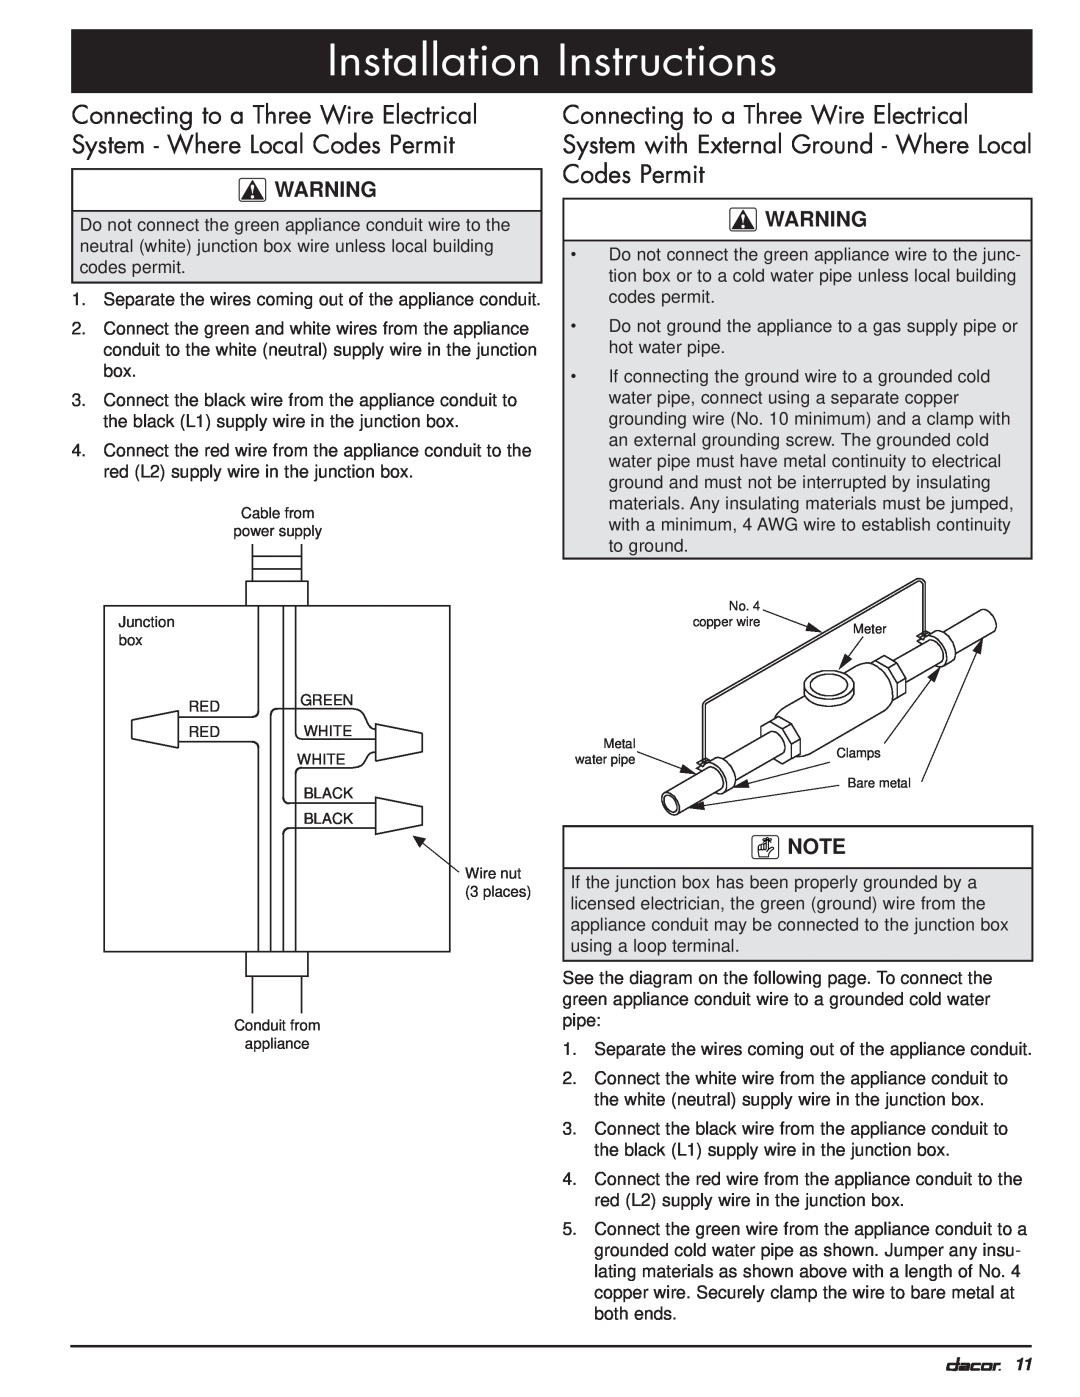 Dacor MO manual Installation Instructions, Cable from power supply 